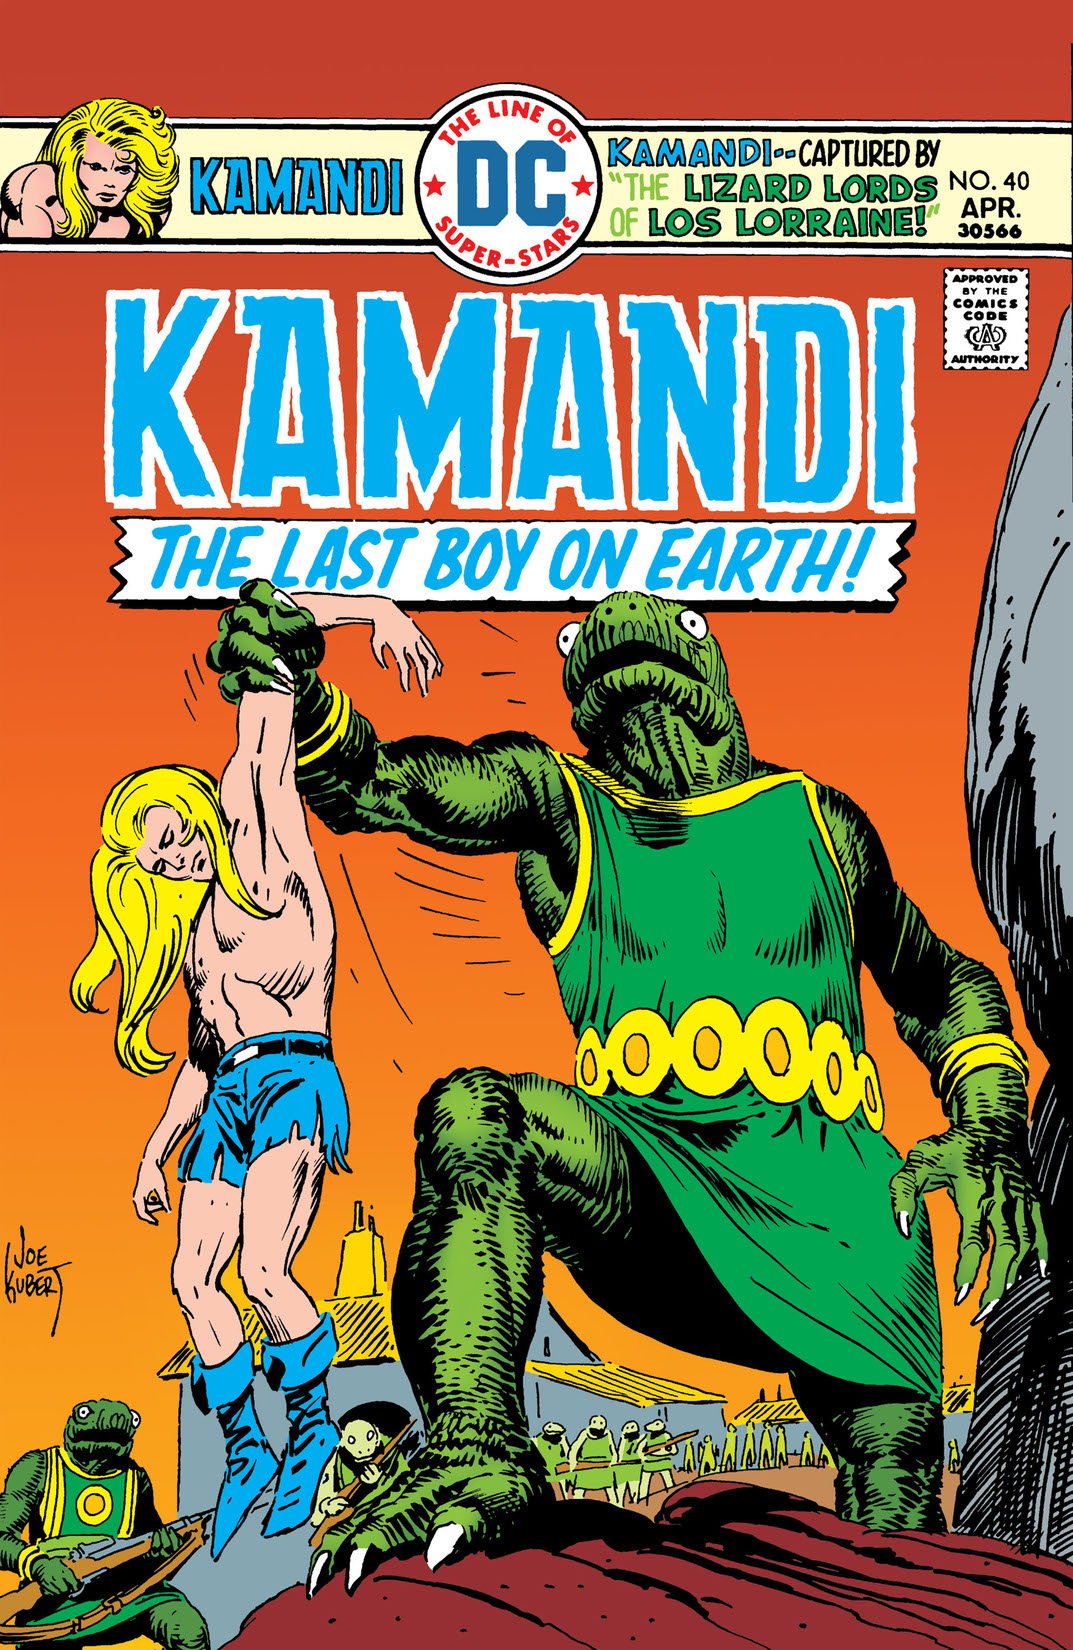 Kamandi: The Last Boy on Earth #40 preview images